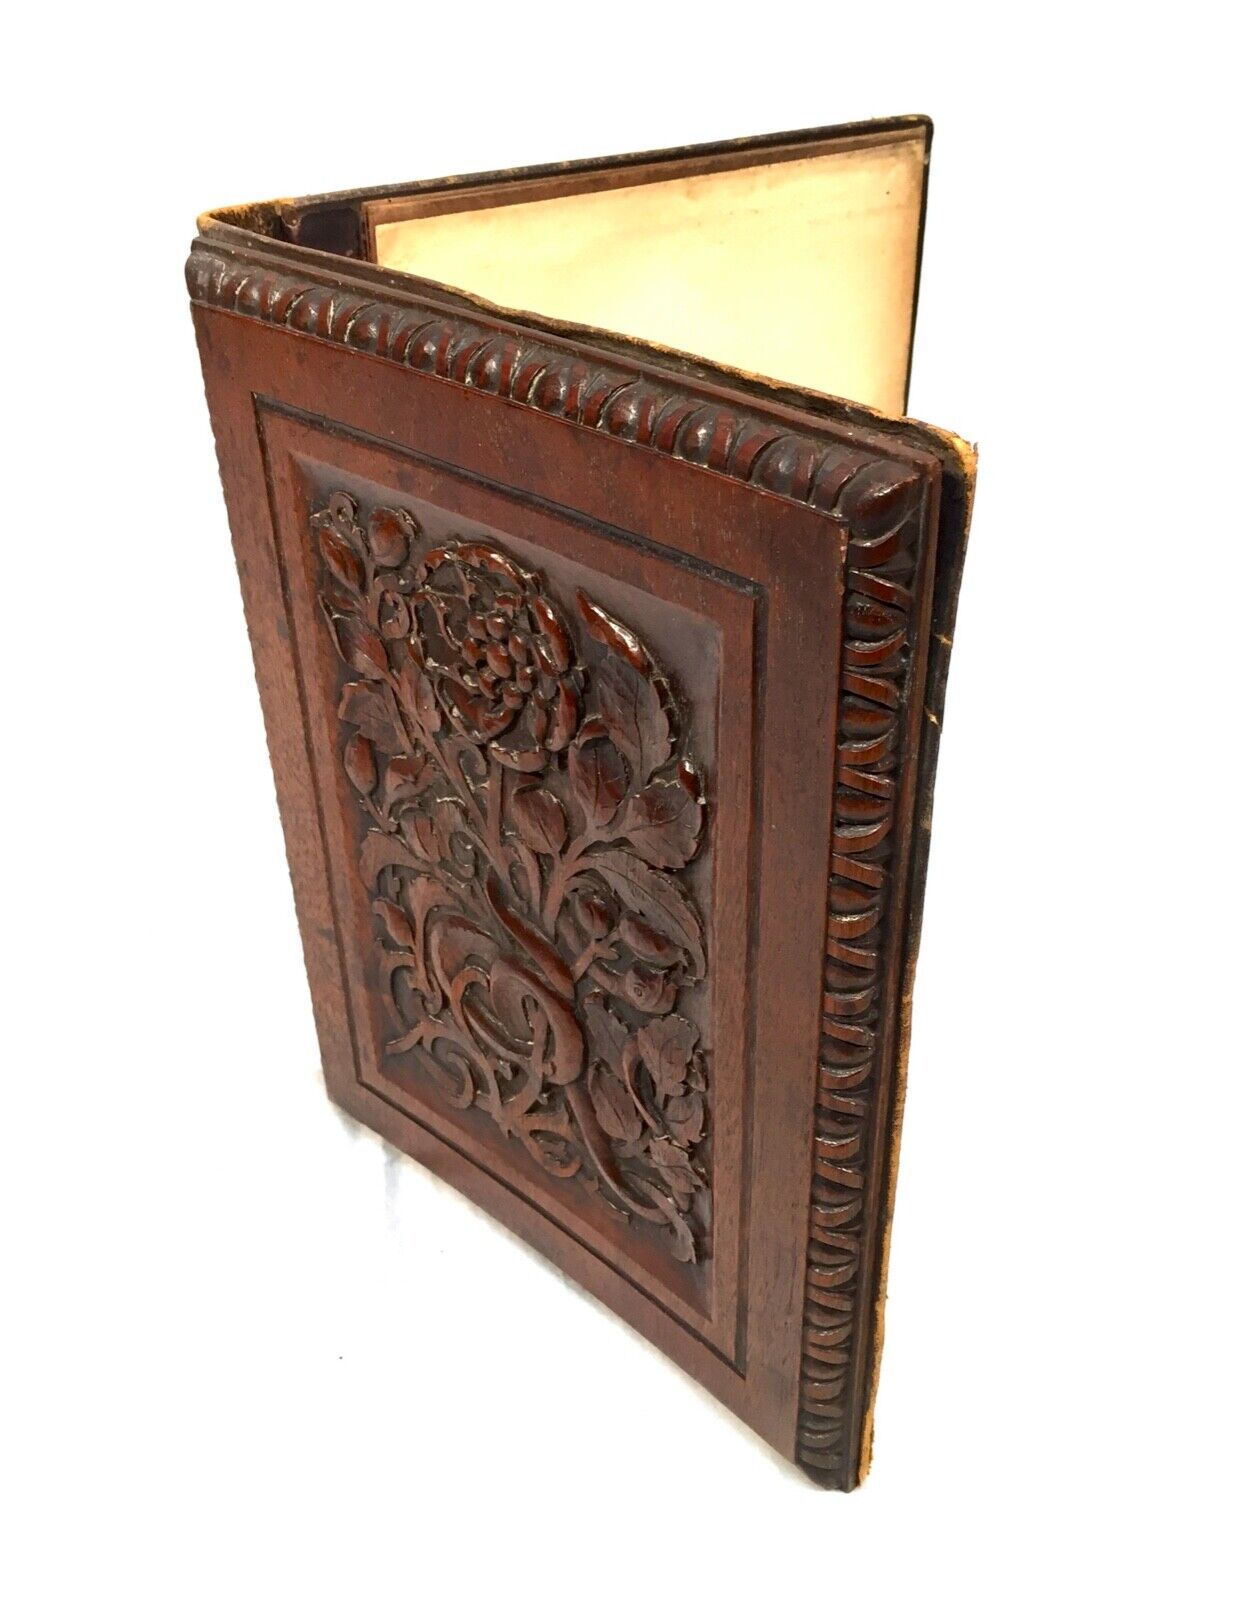 Antique Stationery - Wooden Covered Blotter / Notebook Paper Holder / Victorian